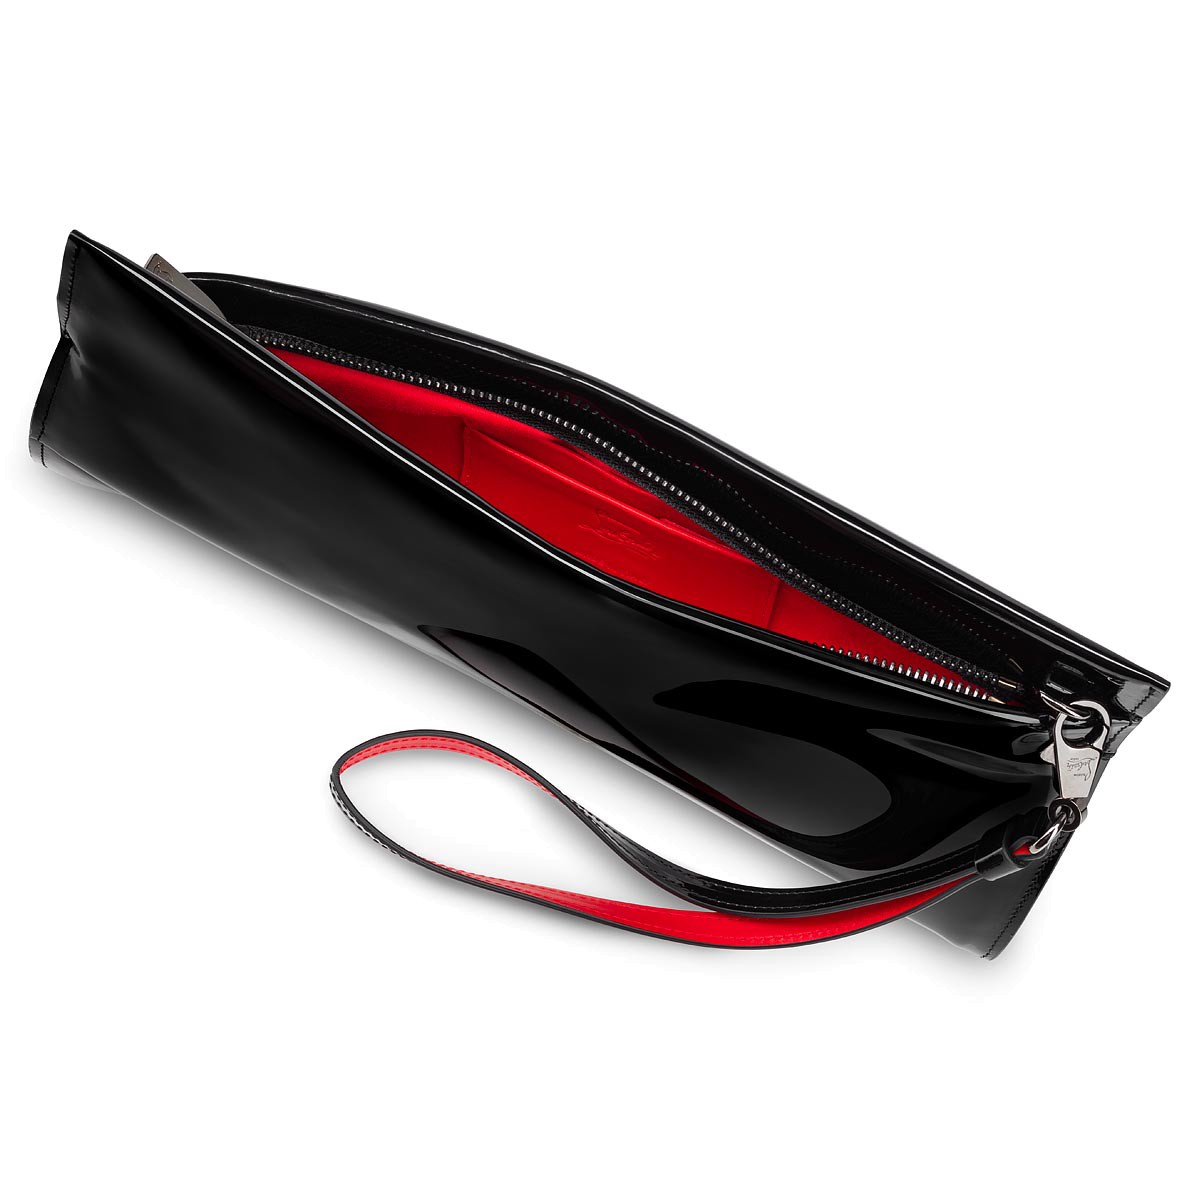 CHRISTIAN LOUBOUTIN: clutch bag in embossed leather - Black